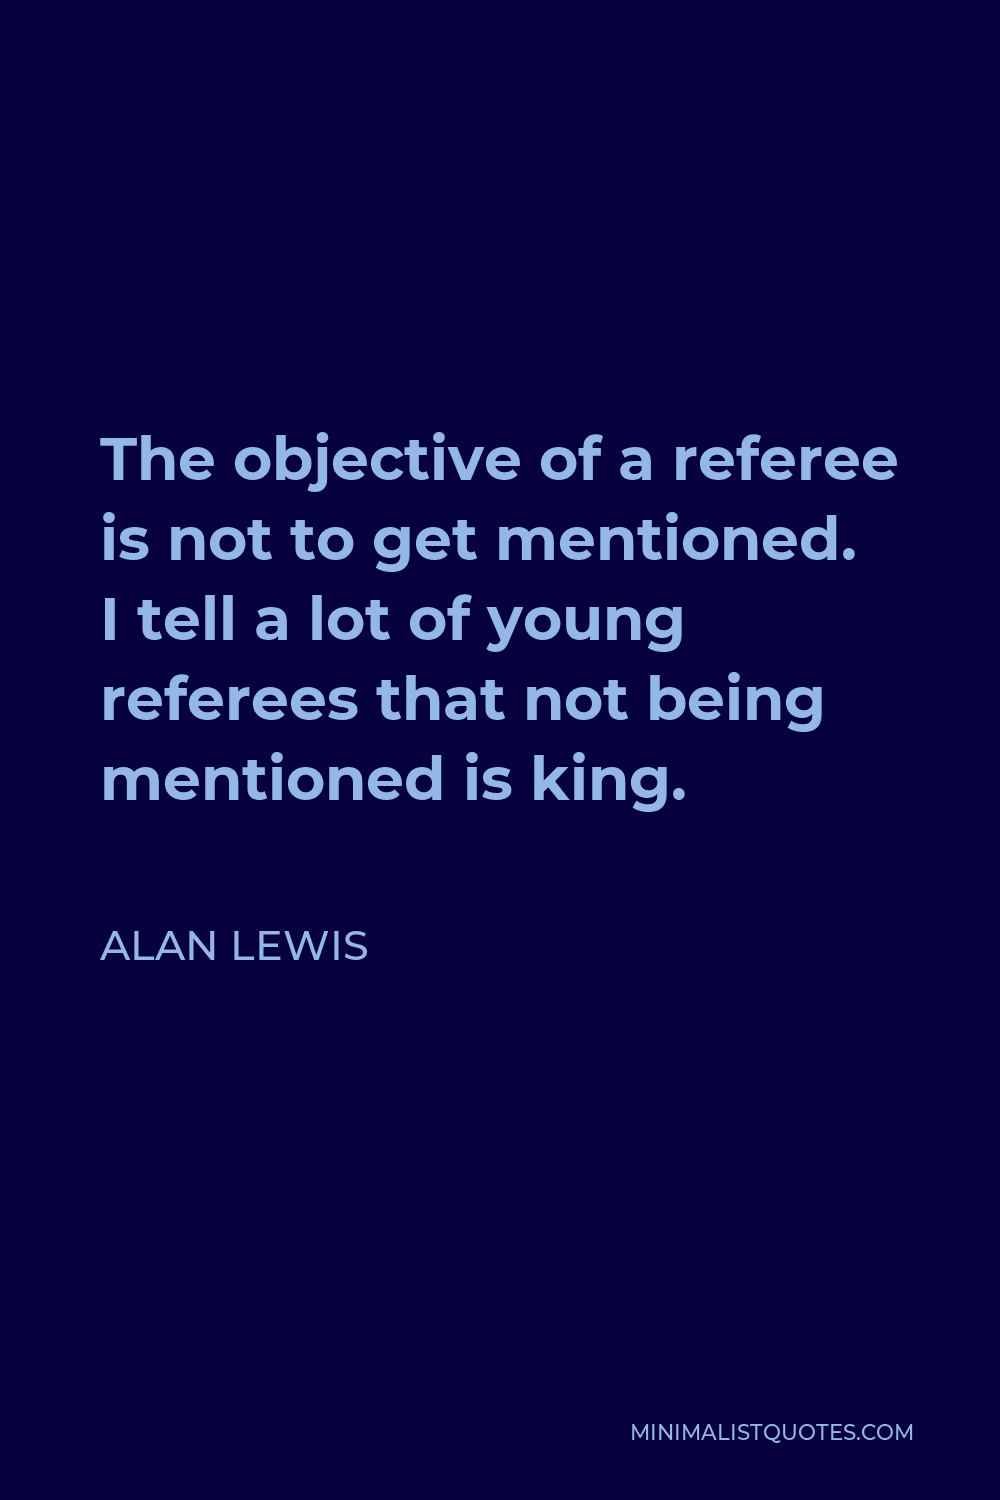 Alan Lewis Quote - The objective of a referee is not to get mentioned. I tell a lot of young referees that not being mentioned is king.